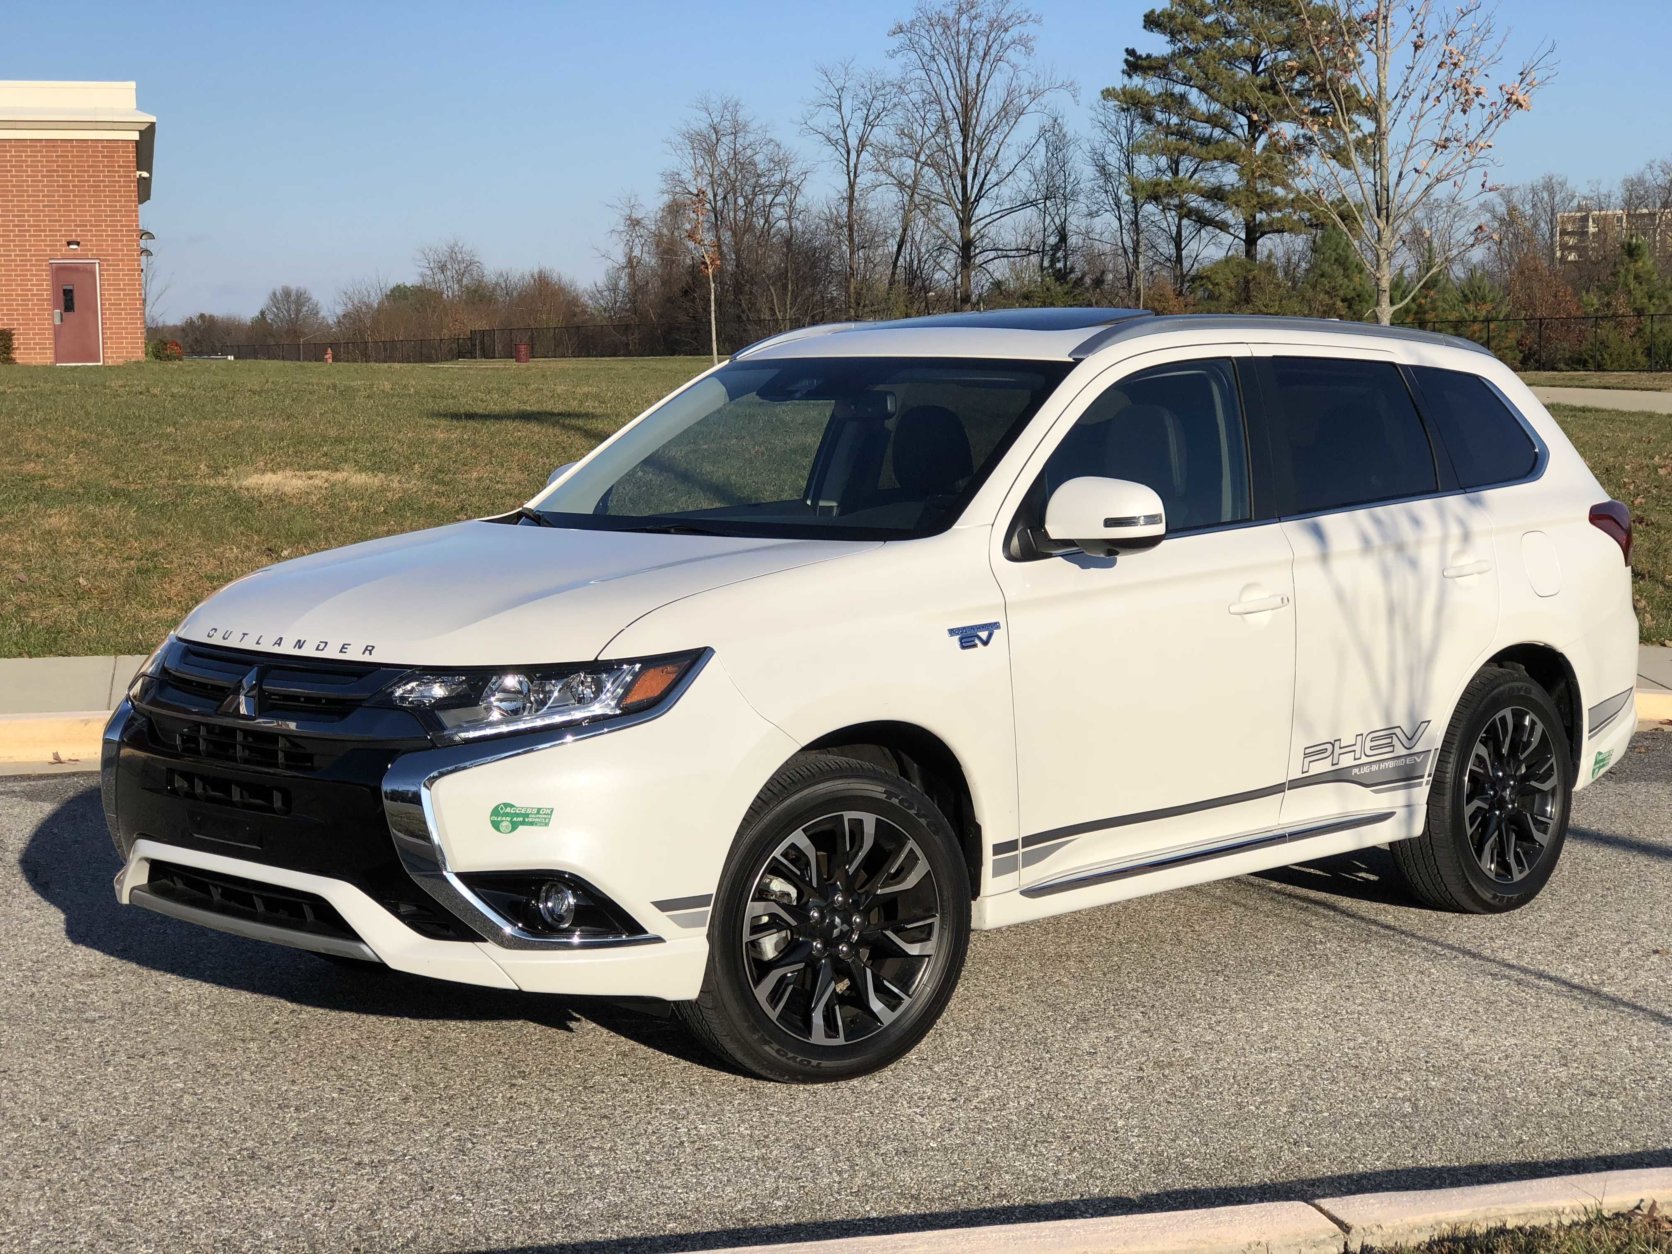 Car Review: Mitsubishi Outlander PHEV lets you plug in, use less gas - WTOP  News